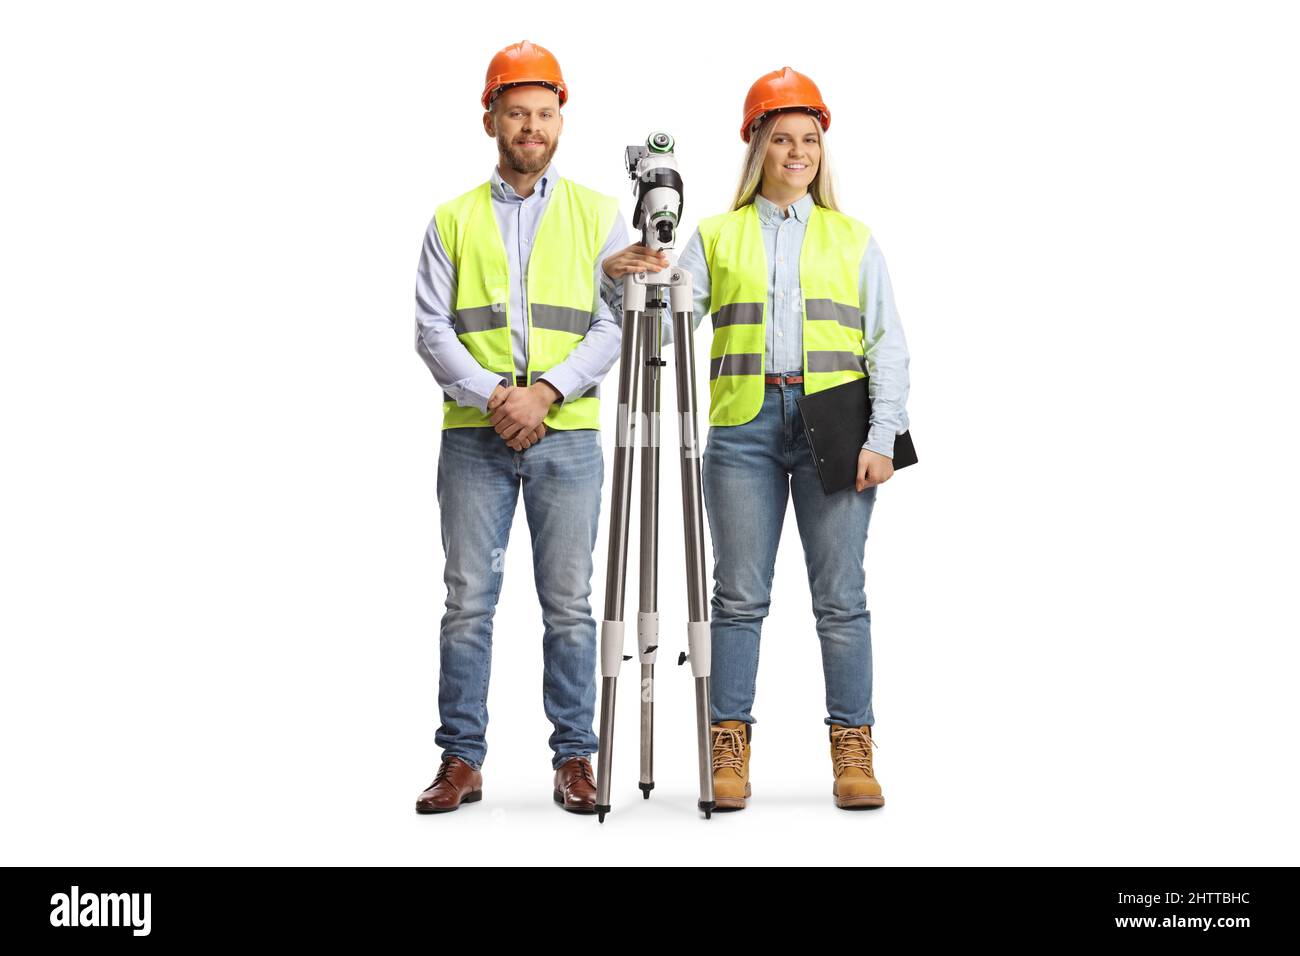 Male and female geodetic surveyors posing with a measuring station isolated on white background Stock Photo